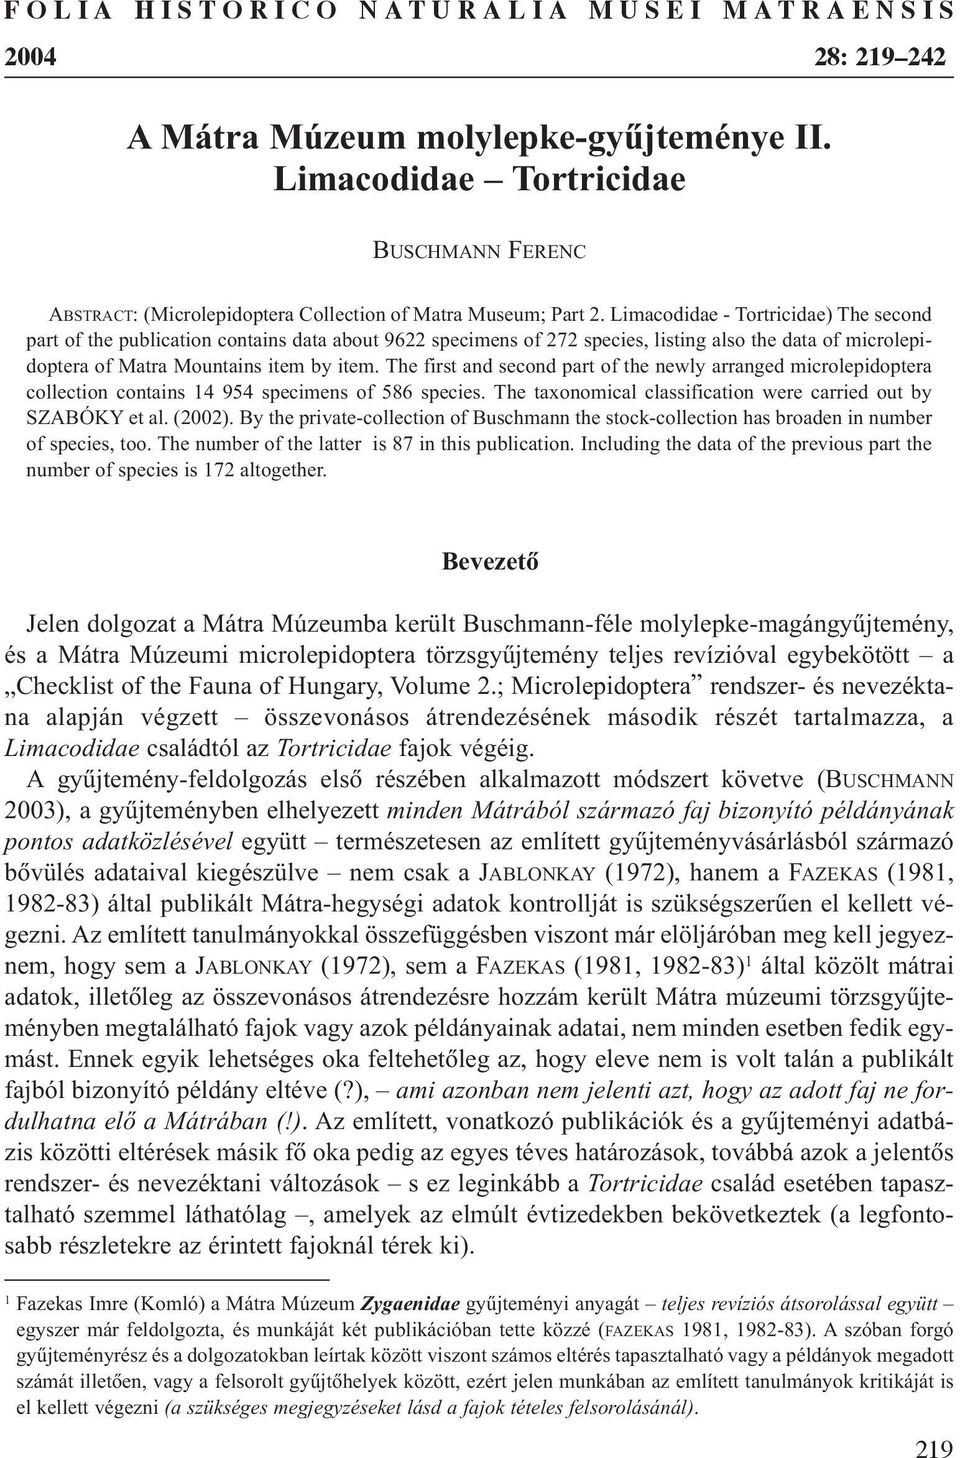 Limacodidae - Tortricidae) The second part of the publication contains data about 9622 specimens of 272 species, listing also the data of microlepidoptera of Matra Mountains item by item.